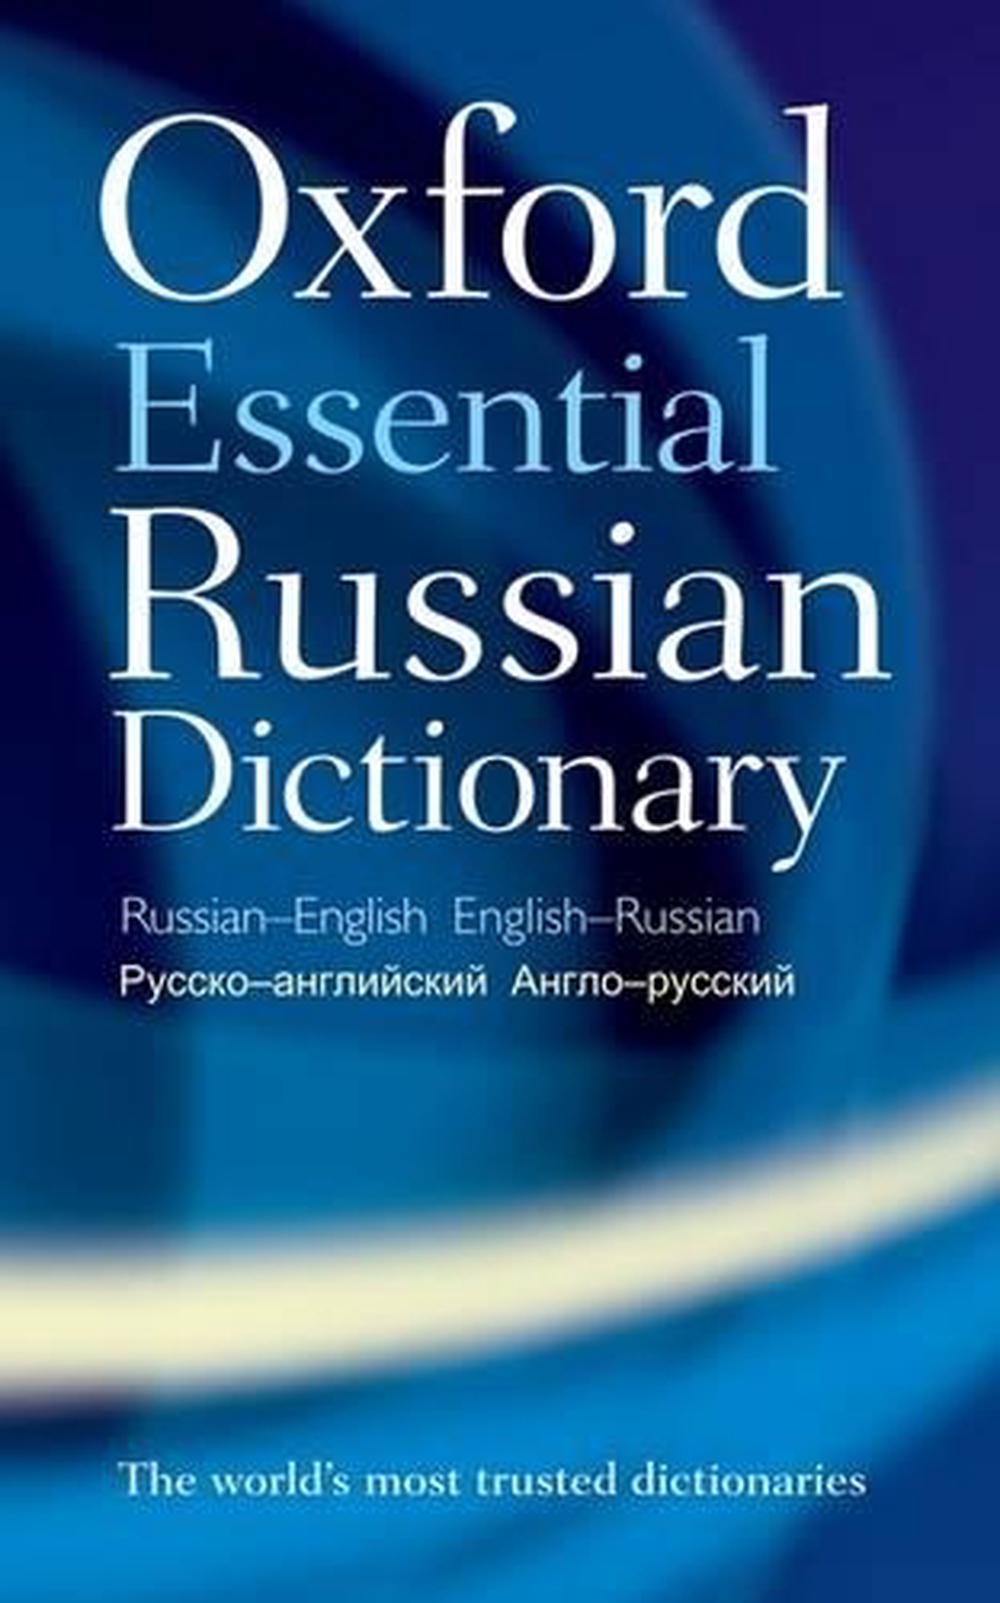 The　by　Buy　Essential　Dictionary　9780199576432　Paperback,　at　Oxford　Languages,　Oxford　Nile　Russian　online